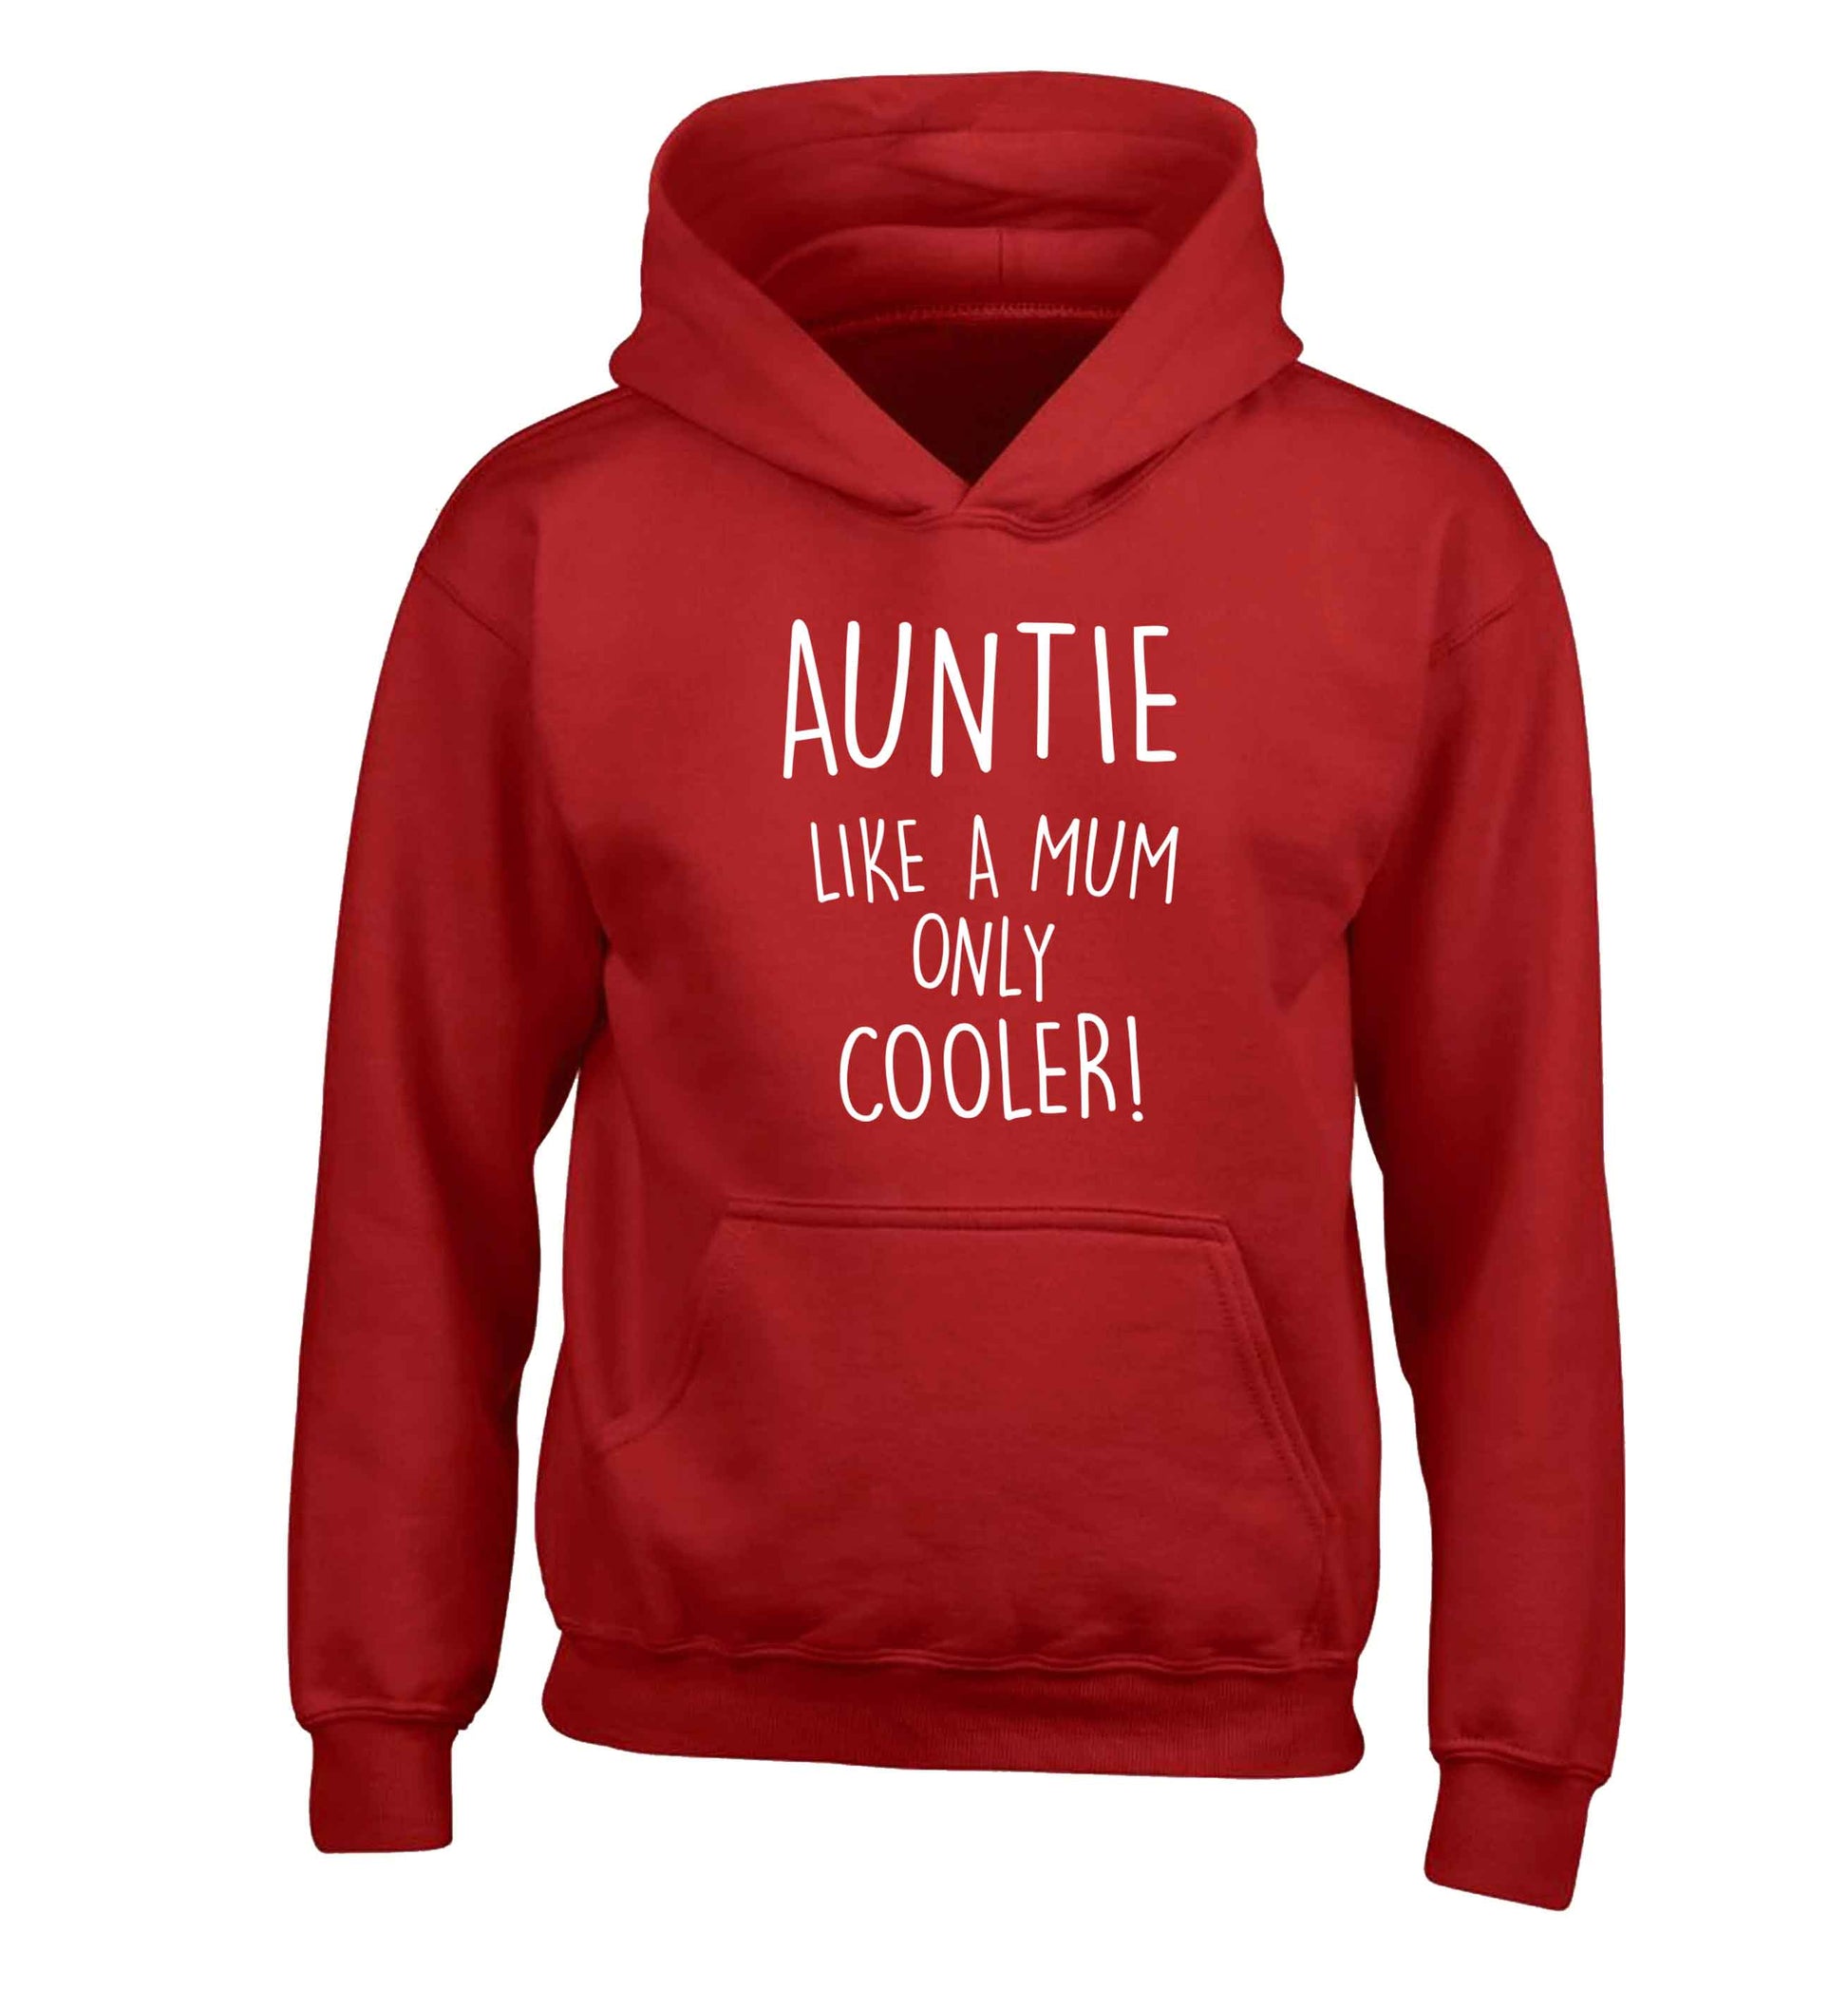 Auntie like a mum only cooler children's red hoodie 12-13 Years